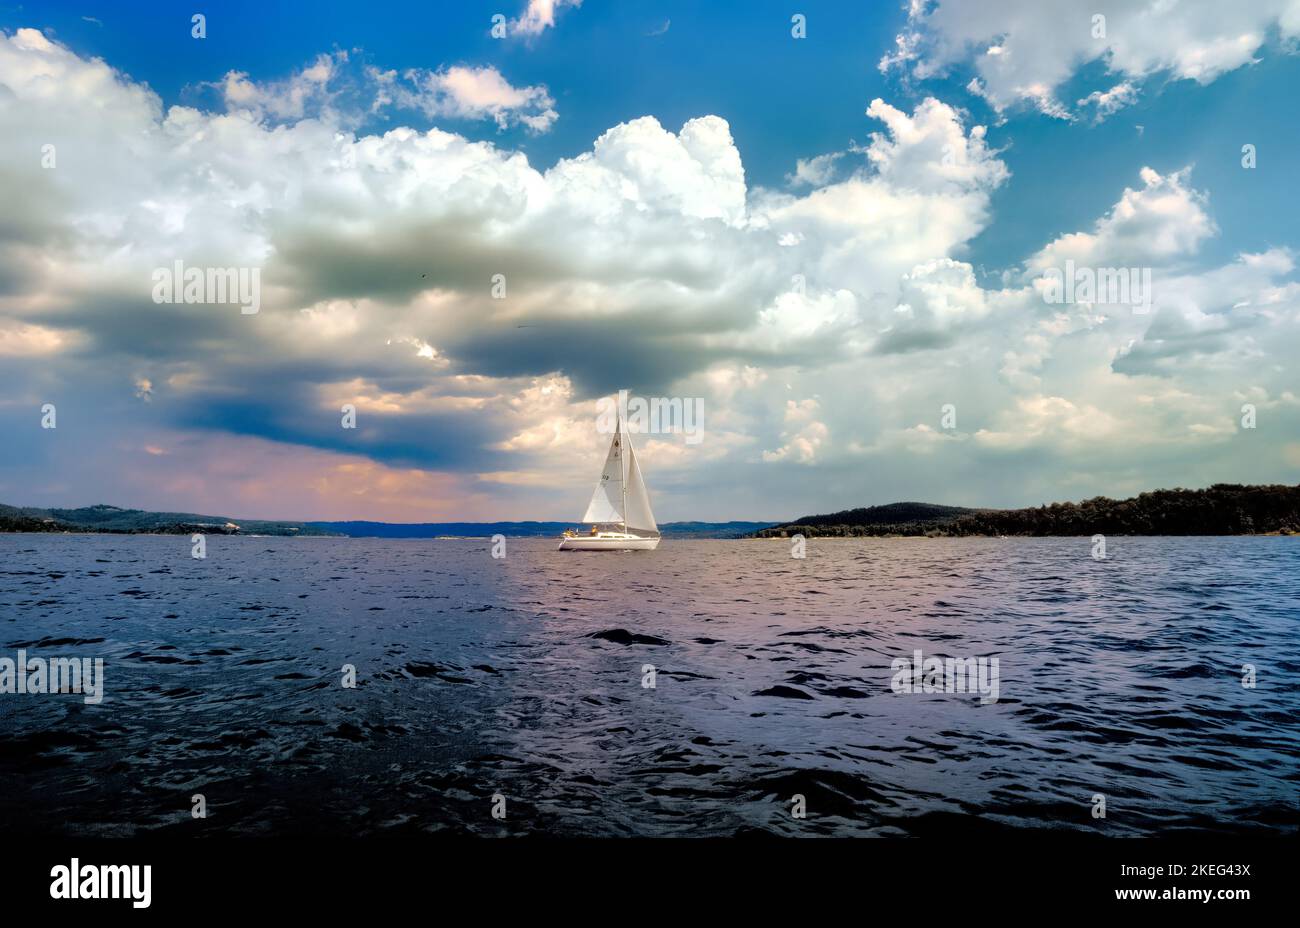 A sailboat glides across Table Rock Lake in Southern Missouri under puffy white clouds. Stock Photo